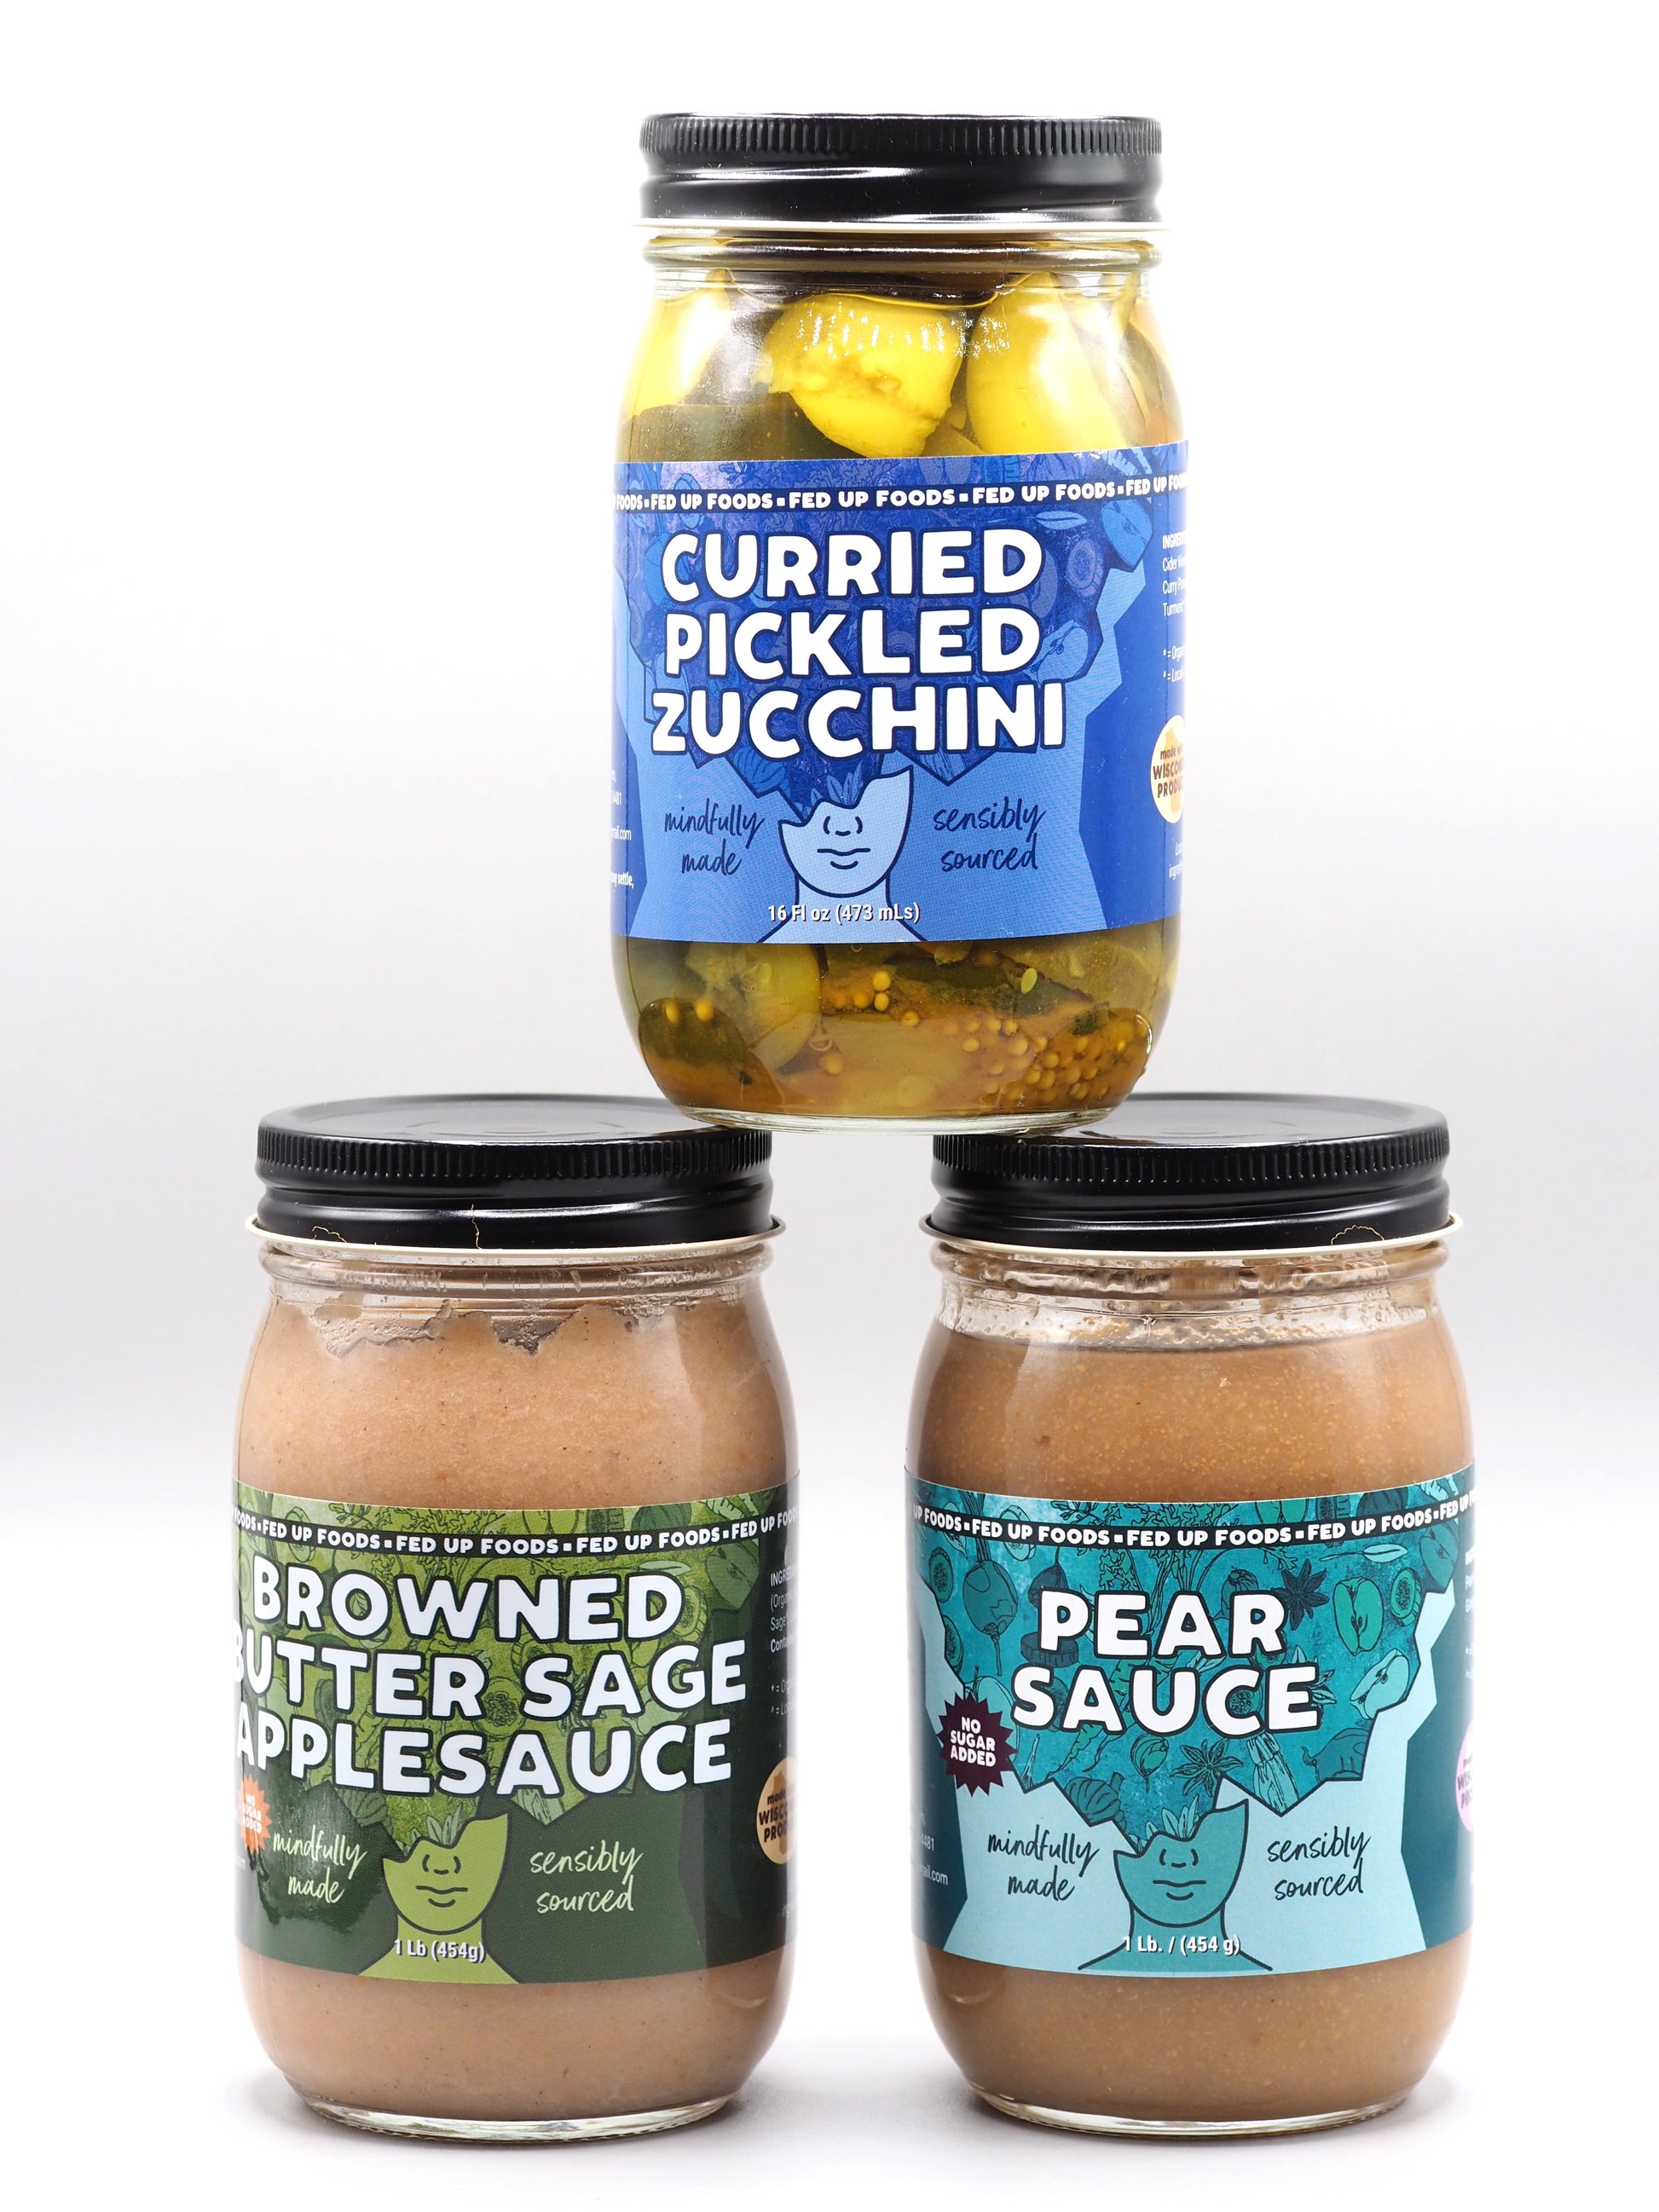 Fed Up Foods Curried Pickled Zucchini, Browned Butter Sage Applesauce, Pear Sauce in a build your own 3 pack variety pack